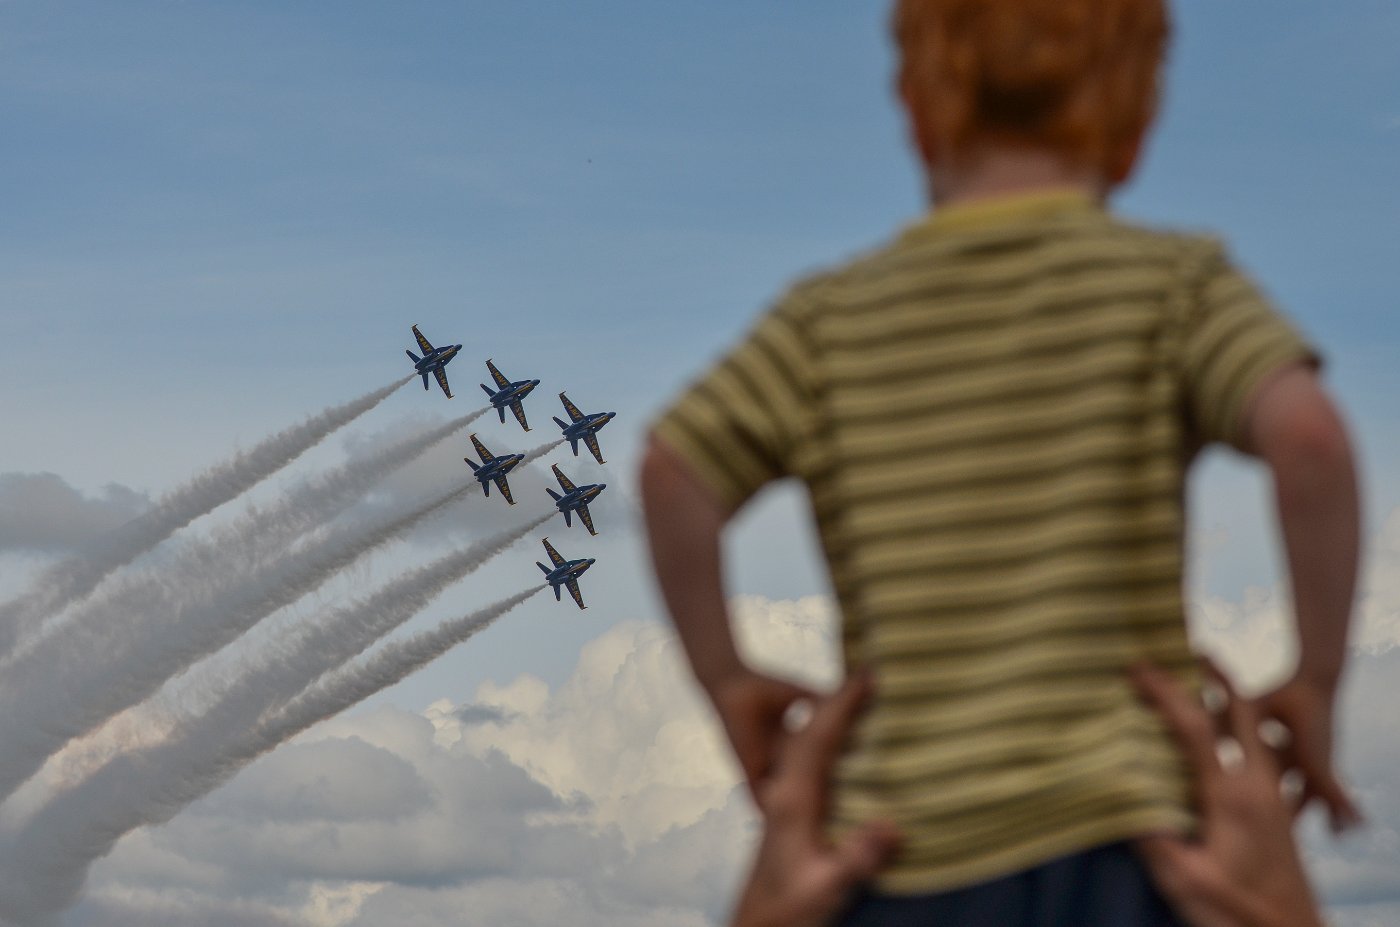 Blue Angels inspire lots of folks, particularly children. So at the 2017 Wings Over North Georgia show there were several kids on shoulders watching them perform. I decided to make this red head kid a part of the Blue's Delta shot.